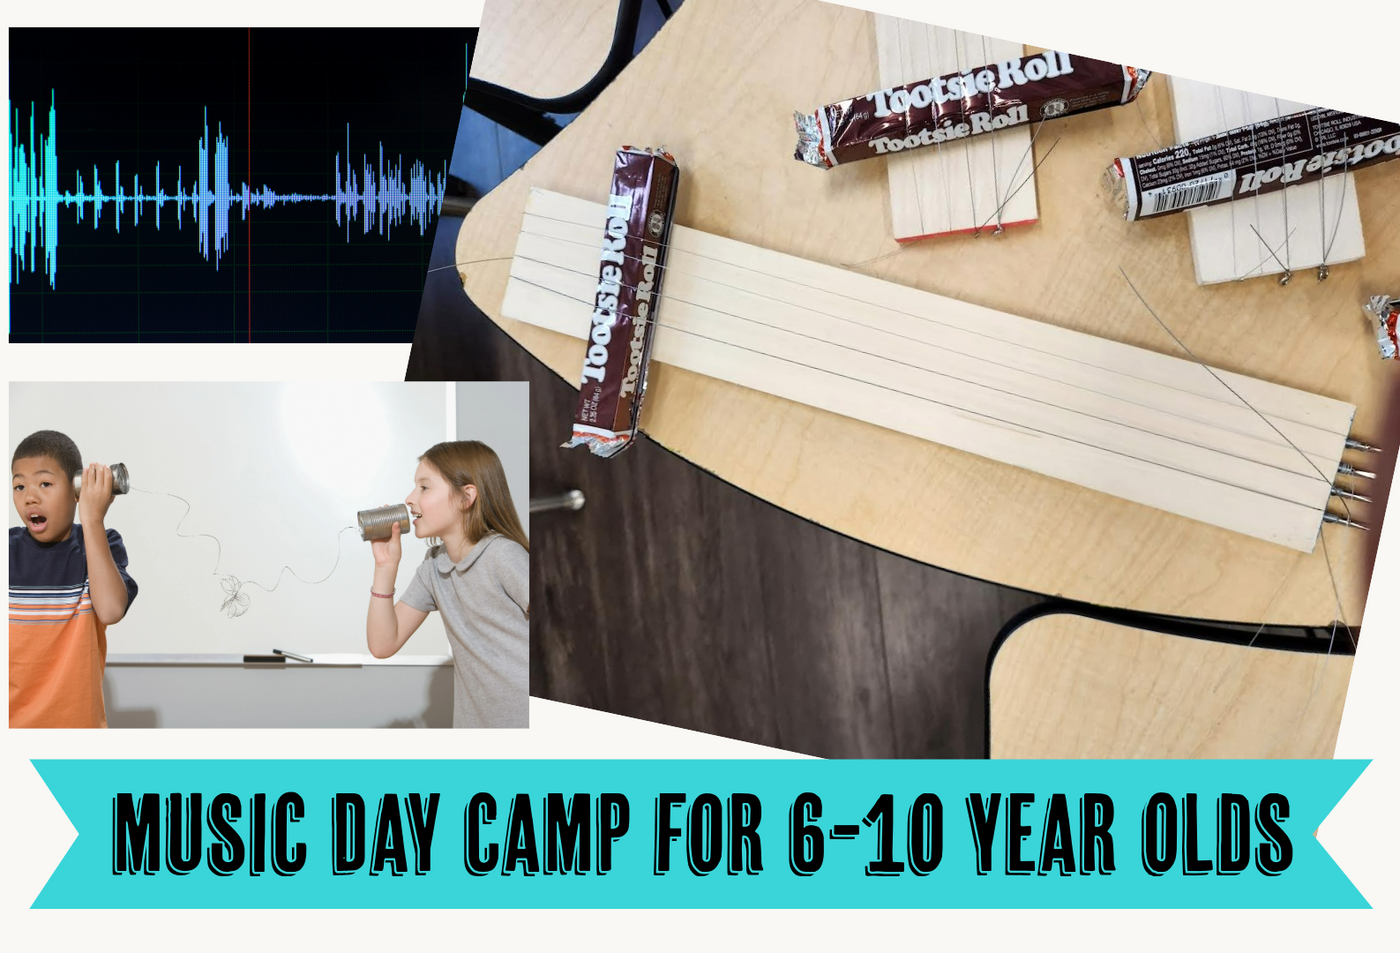 STEM Physics of Music Camp 7/15-7/19 for 6-10 Year Olds